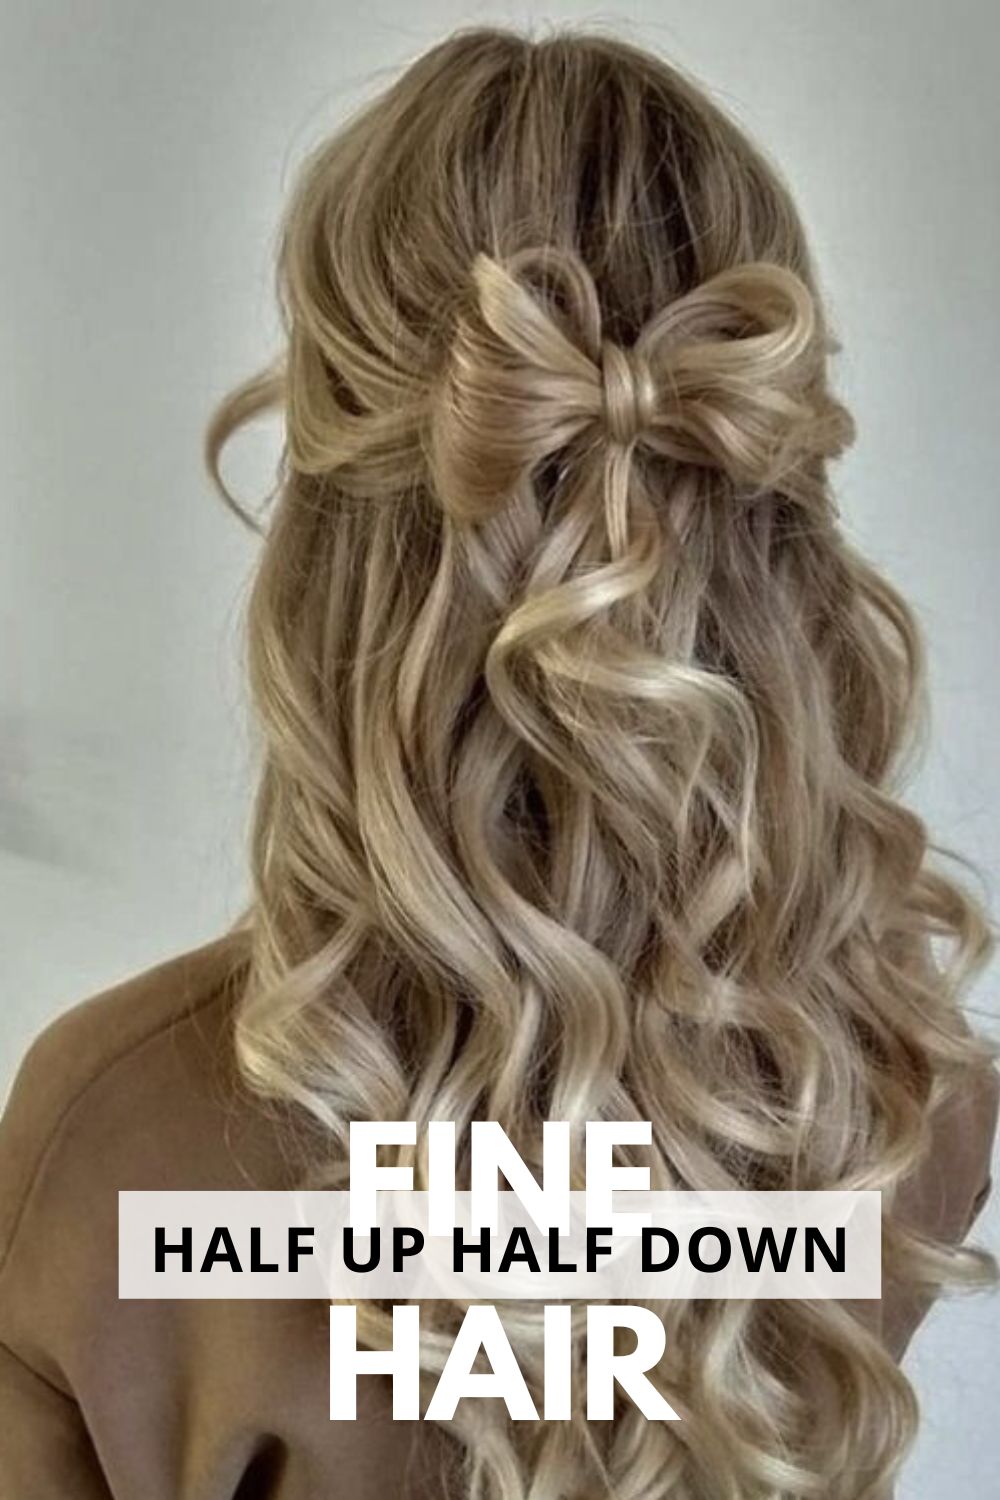 Half Up Half Down for Fine Hair